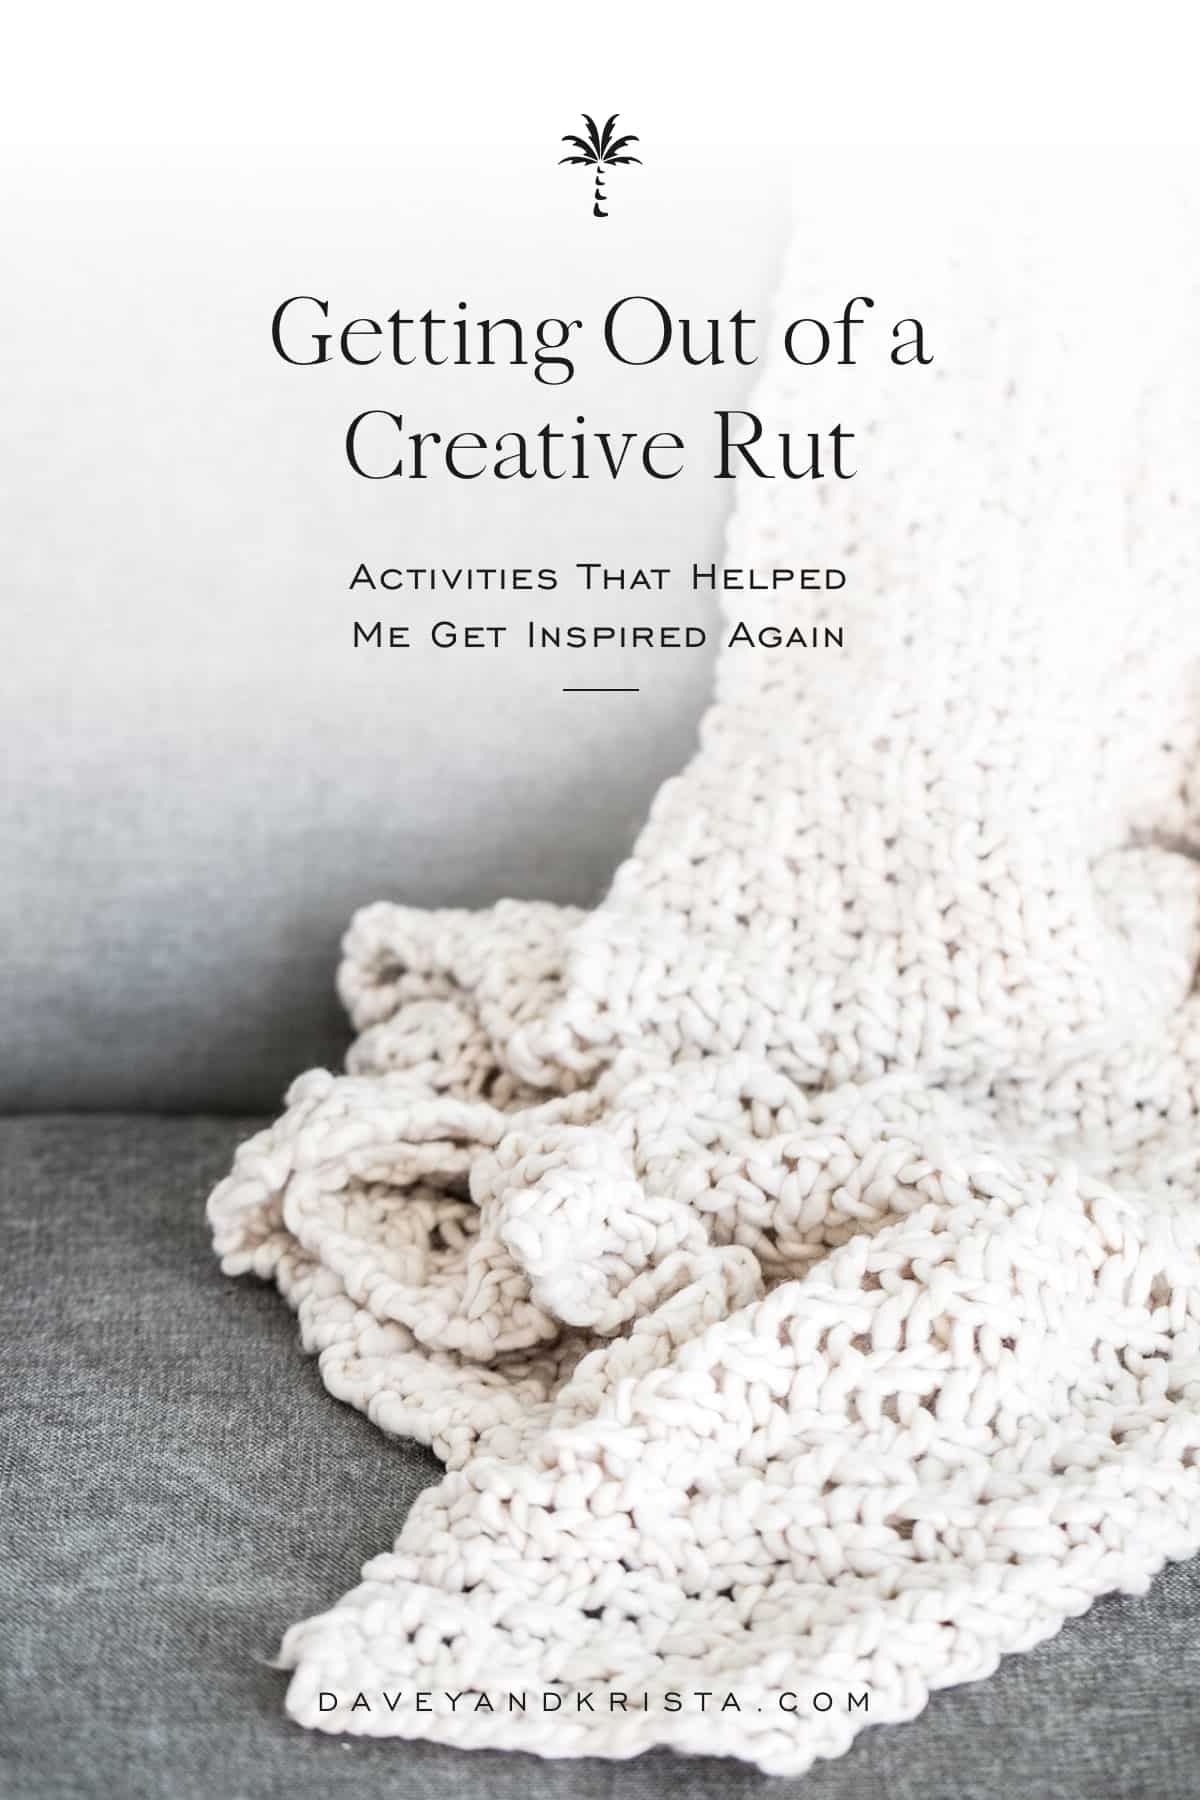 Getting Out of a Creative Rut | Davey & Krista